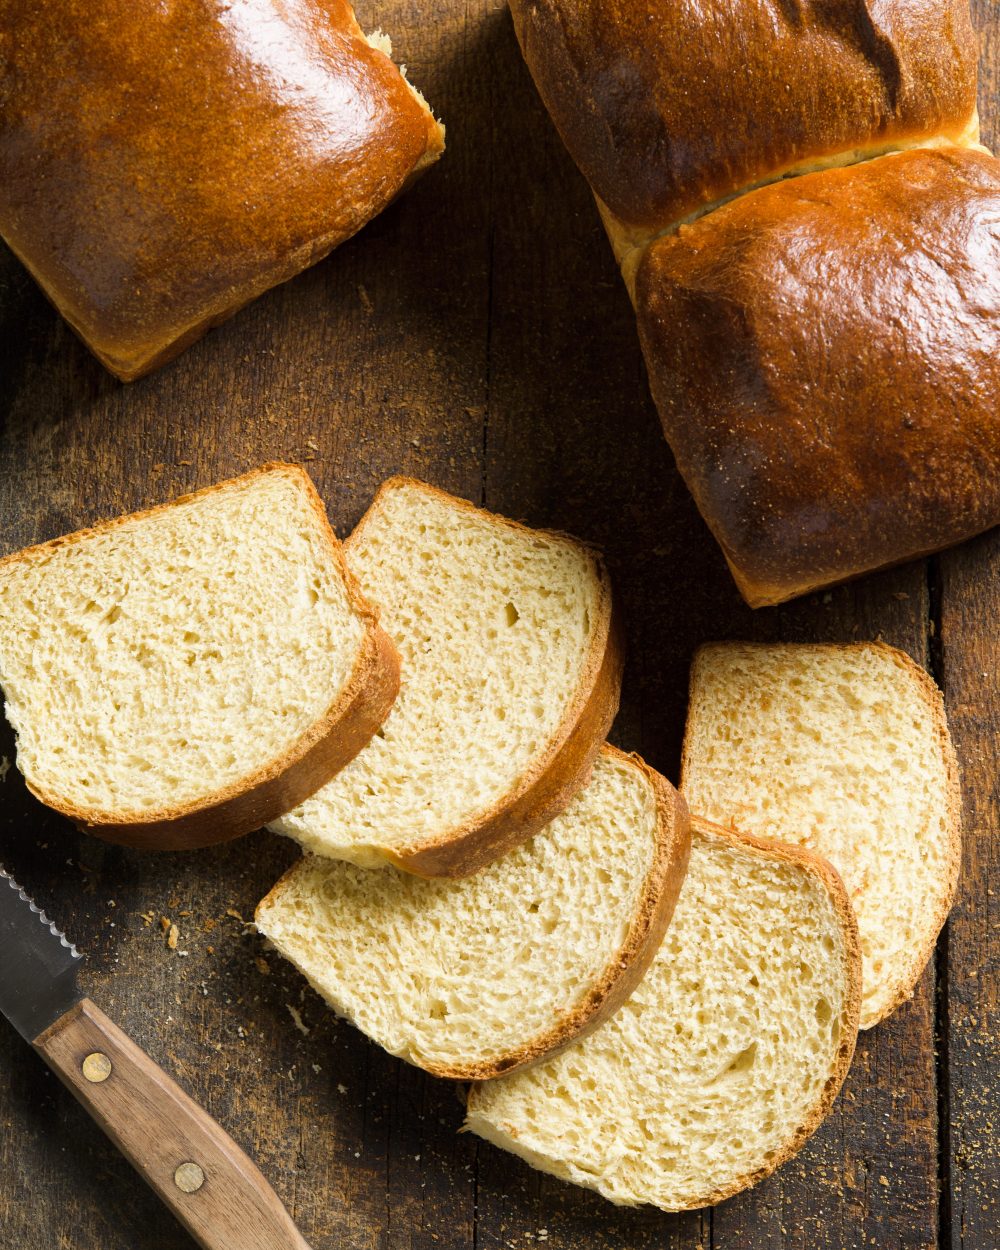 Fluffy and slightly sweet, this milk bread gets nutty flavor from rye flour.